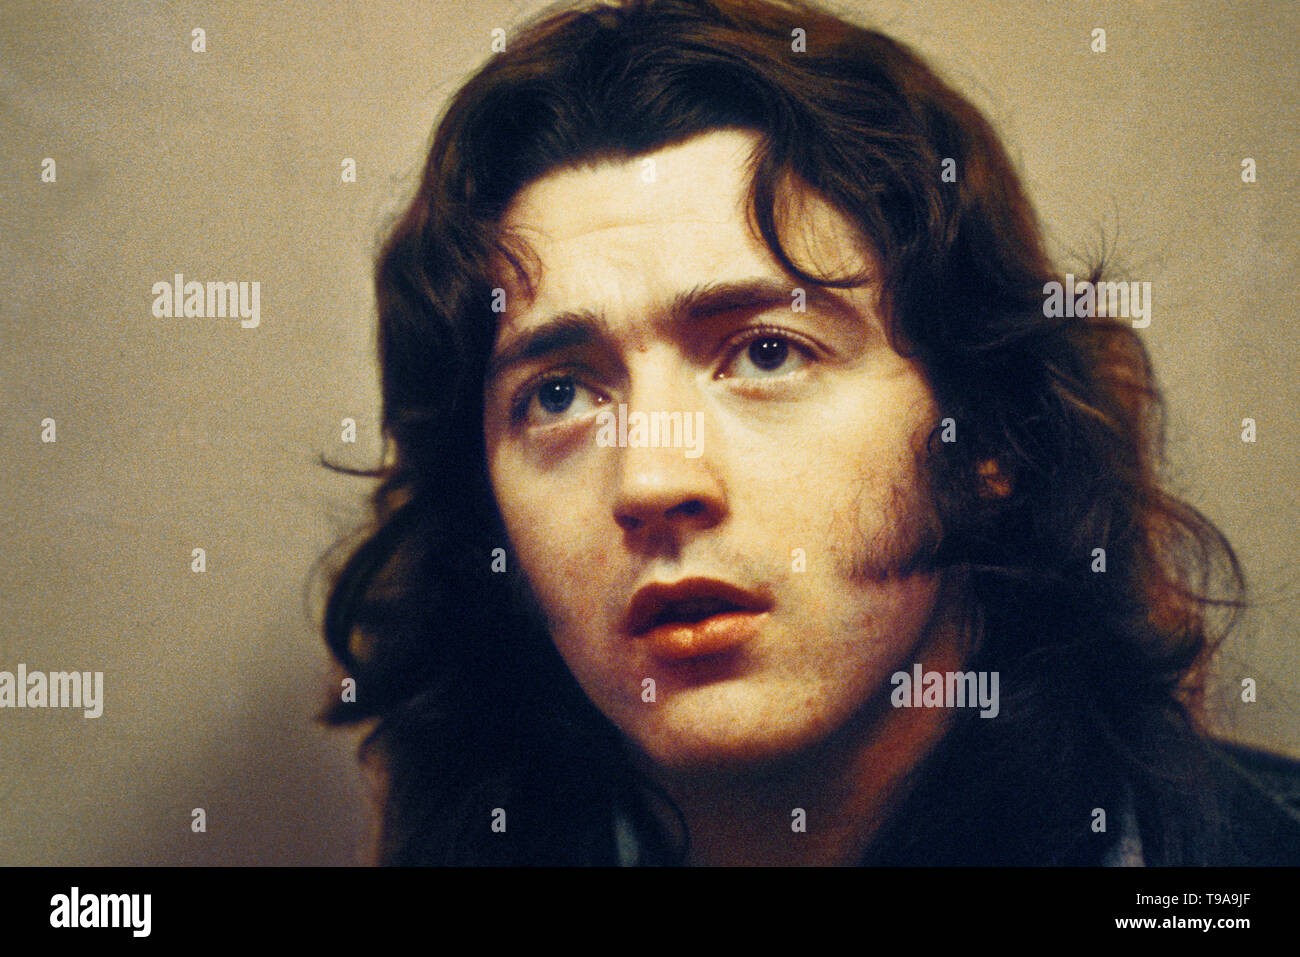 Rory Gallagher, Manchester, Great Britain - 1973,  (Photo Gijsbert Hanekroot) *** Local Caption *** Rory Gallagher Stock Photo